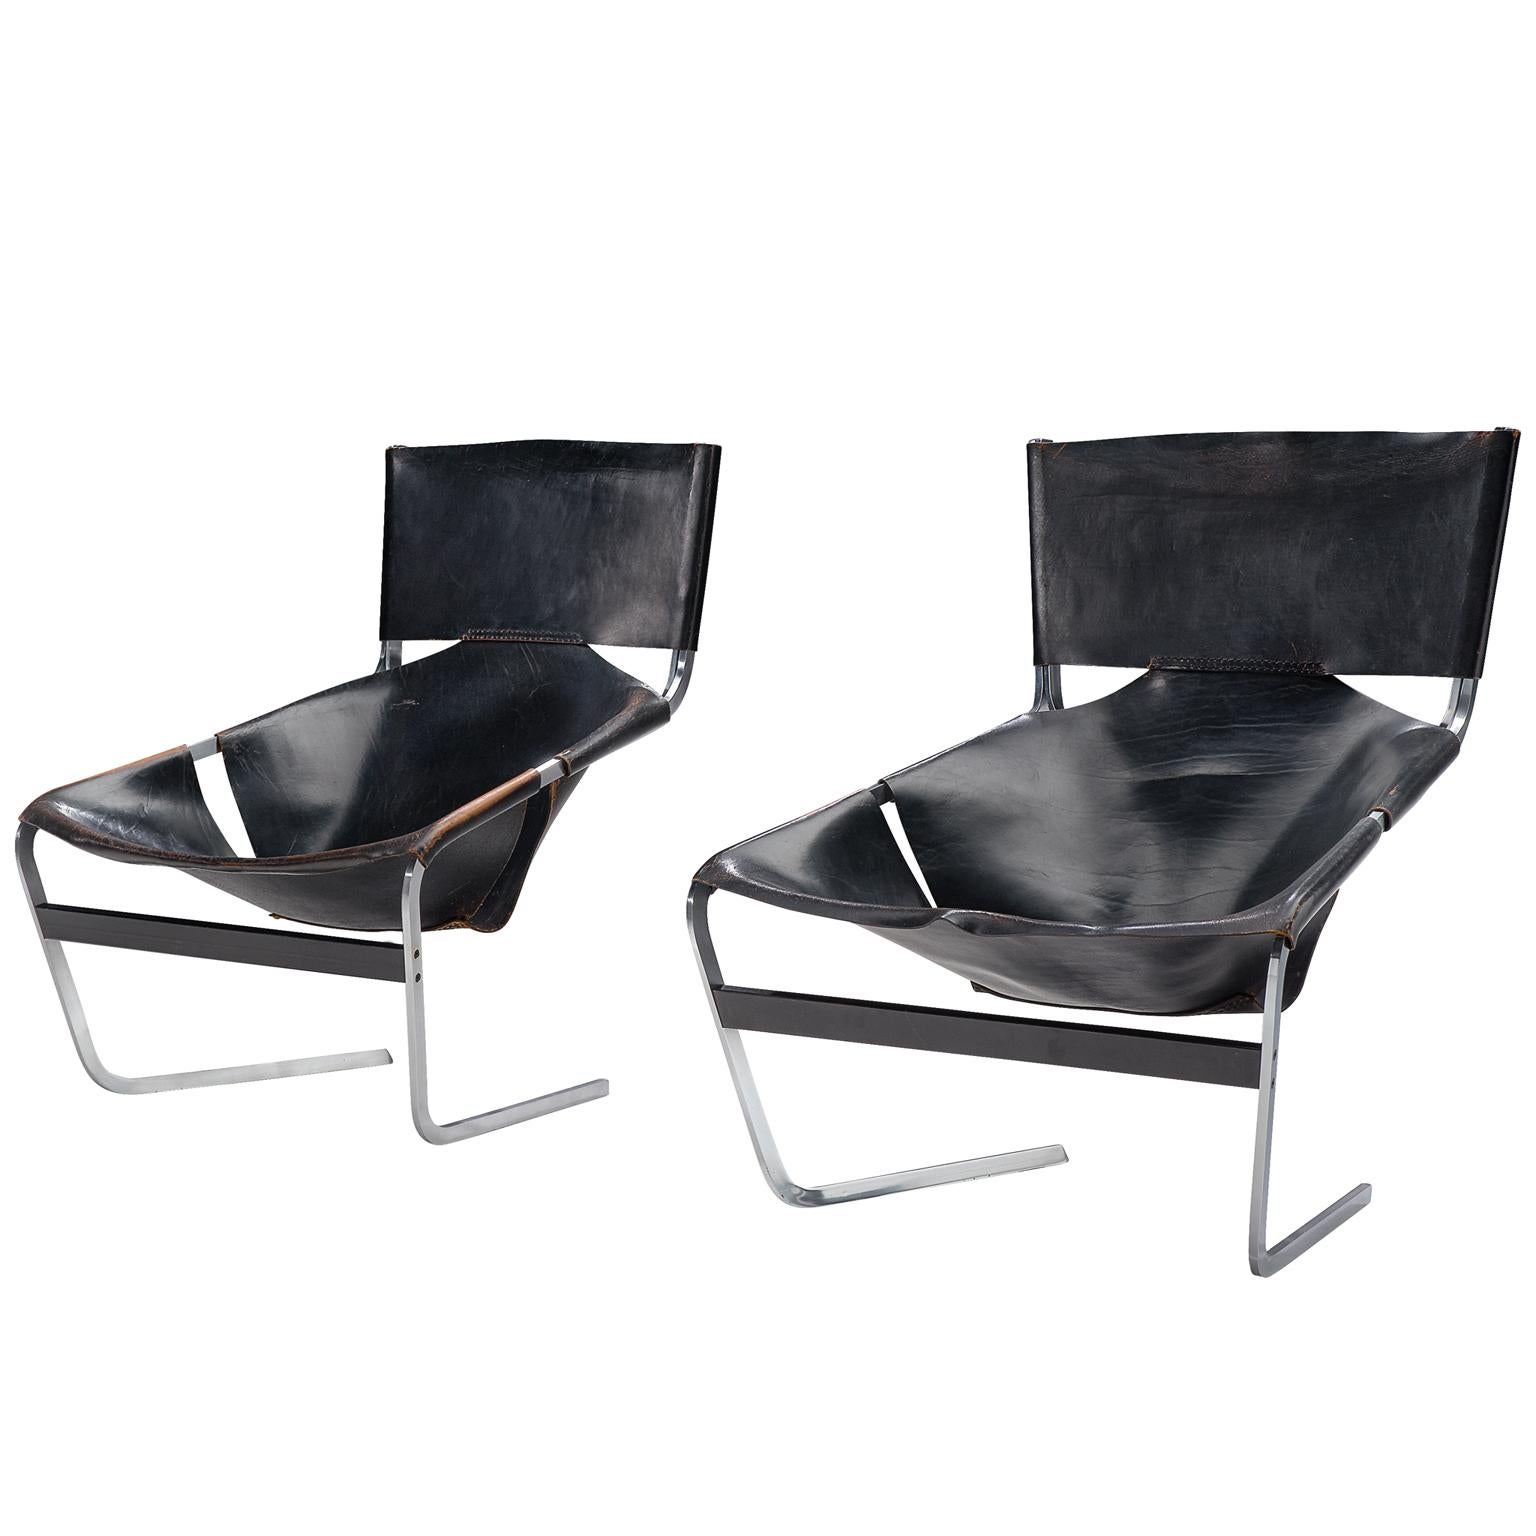 Pierre Paulin F-444 Lounge Chairs in Black Leather